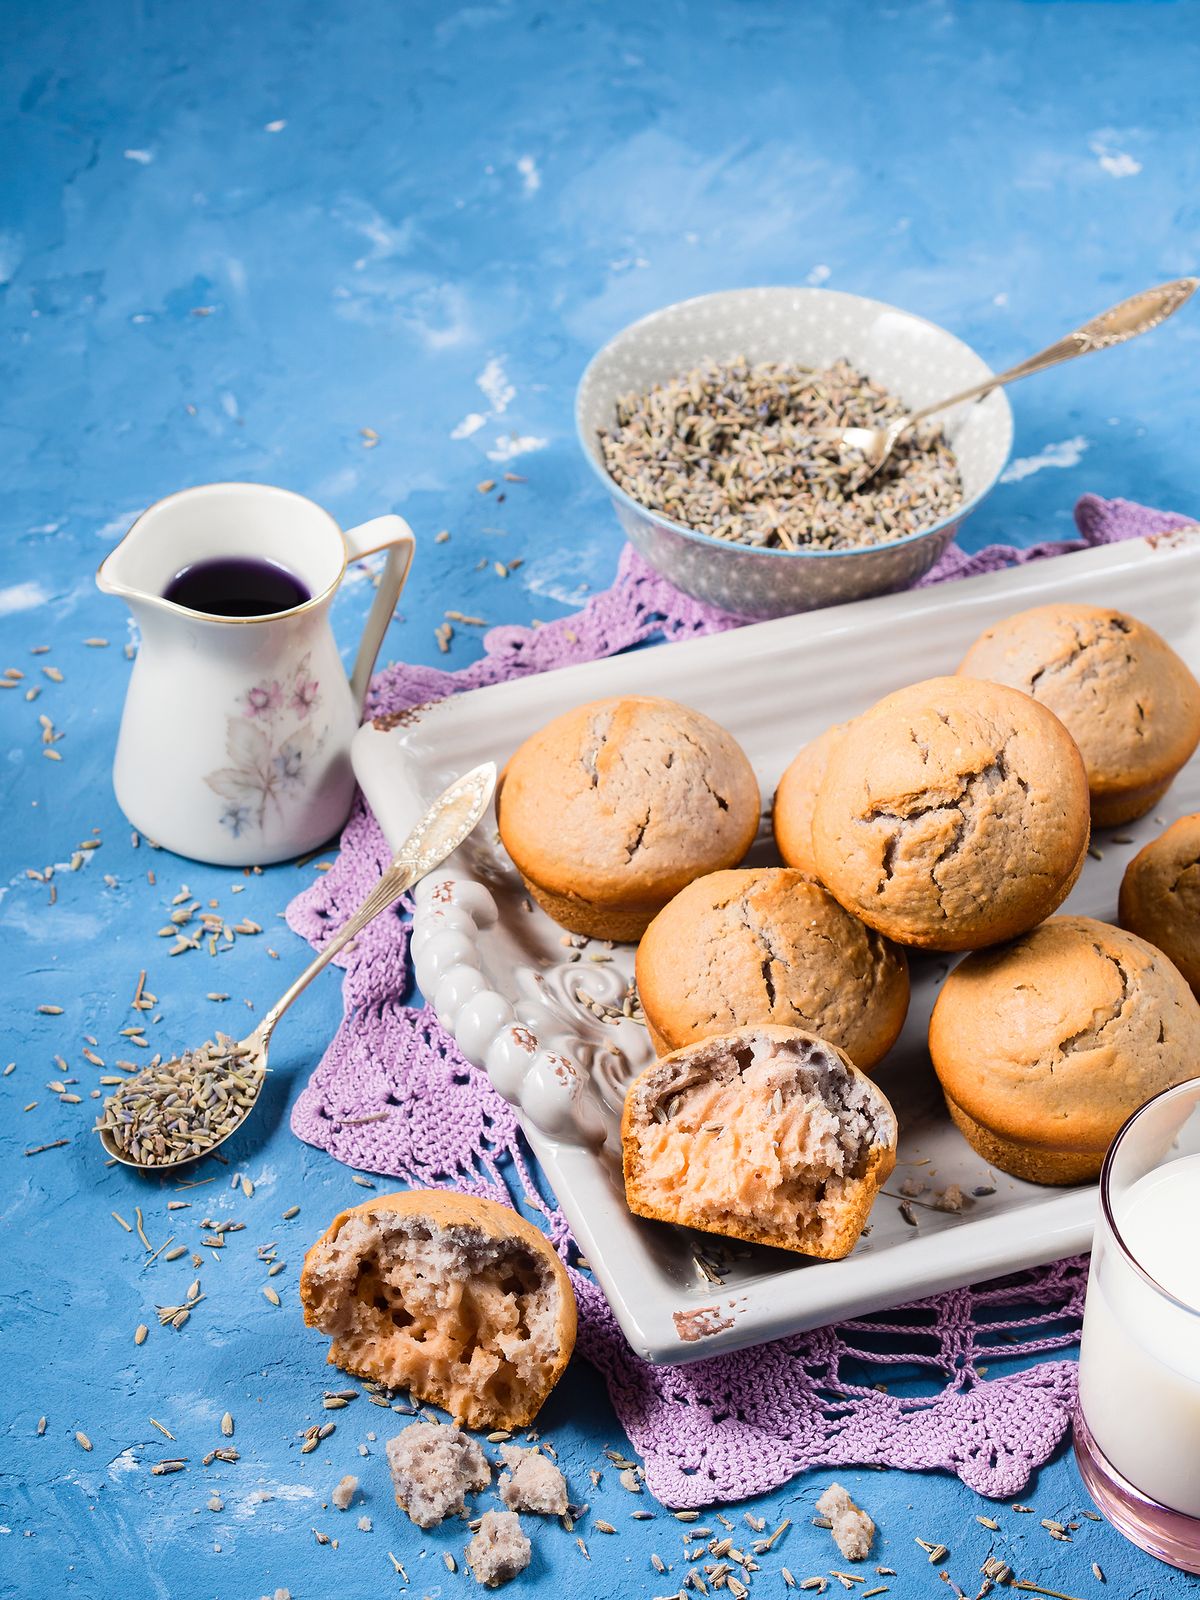 Lavender,Muffins,With,Ingredients,-,Syrup,,Milk,And,Flowers,On